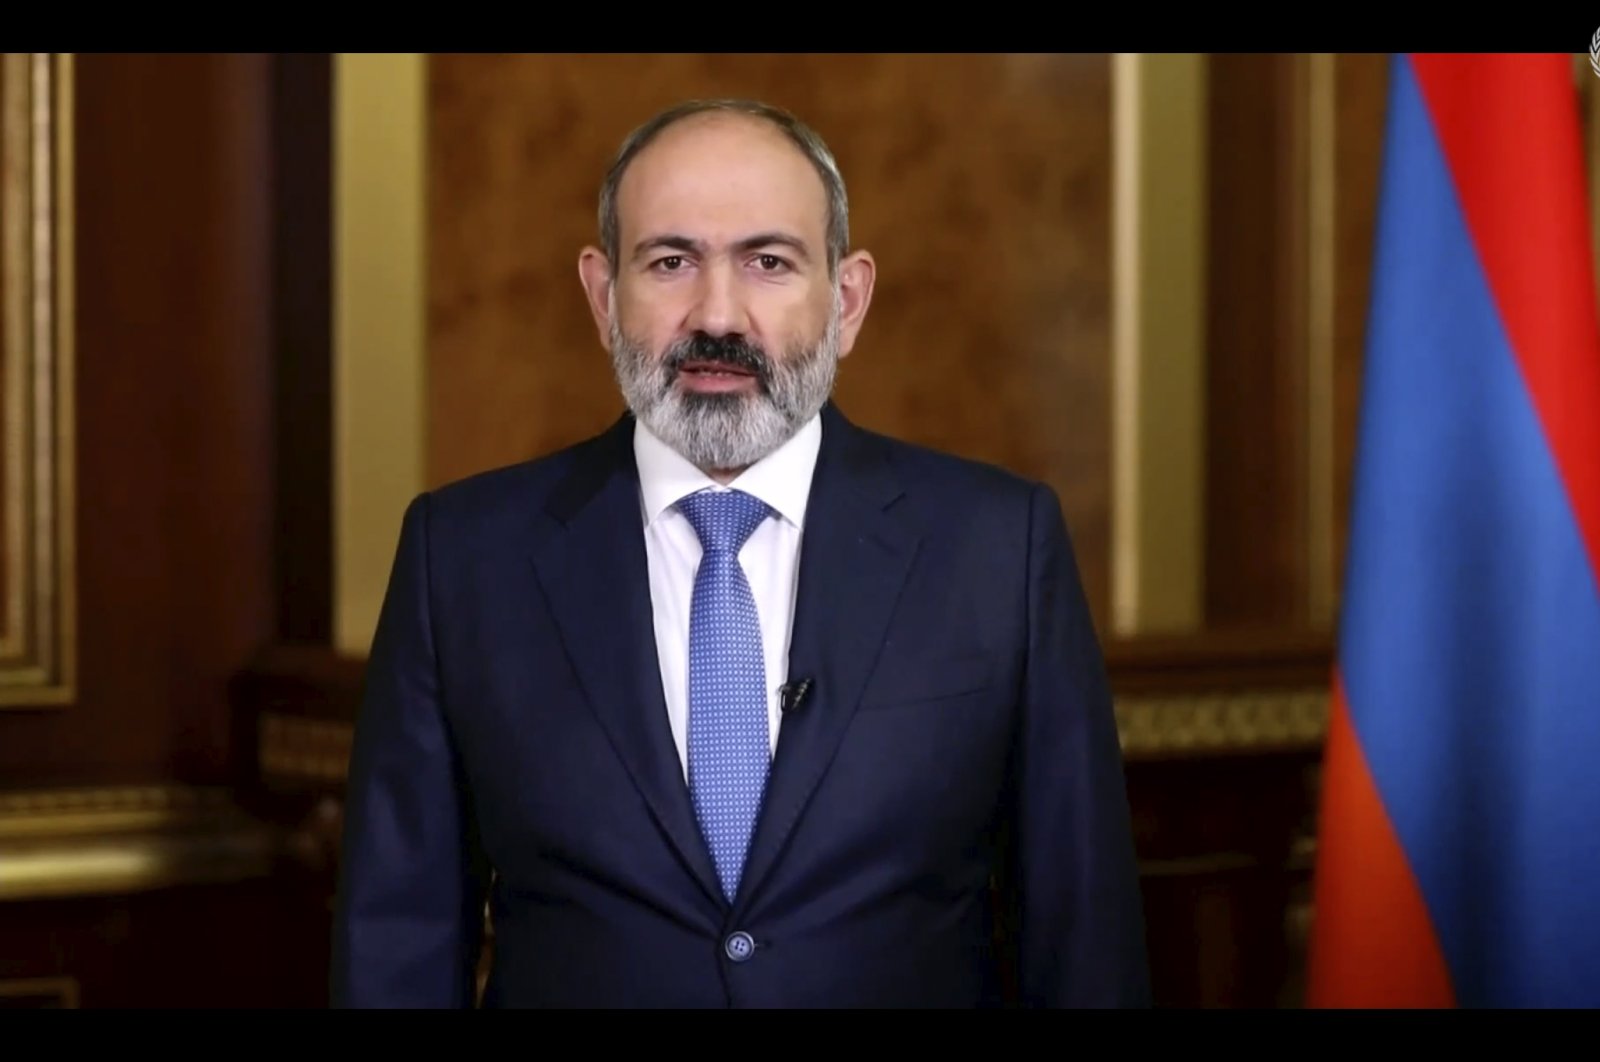 Armenian Prime Minister Nikol Pashinian remotely addresses the 76th session of the United Nations General Assembly in a pre-recorded message, Sept. 24, 2021. (AP Photo)